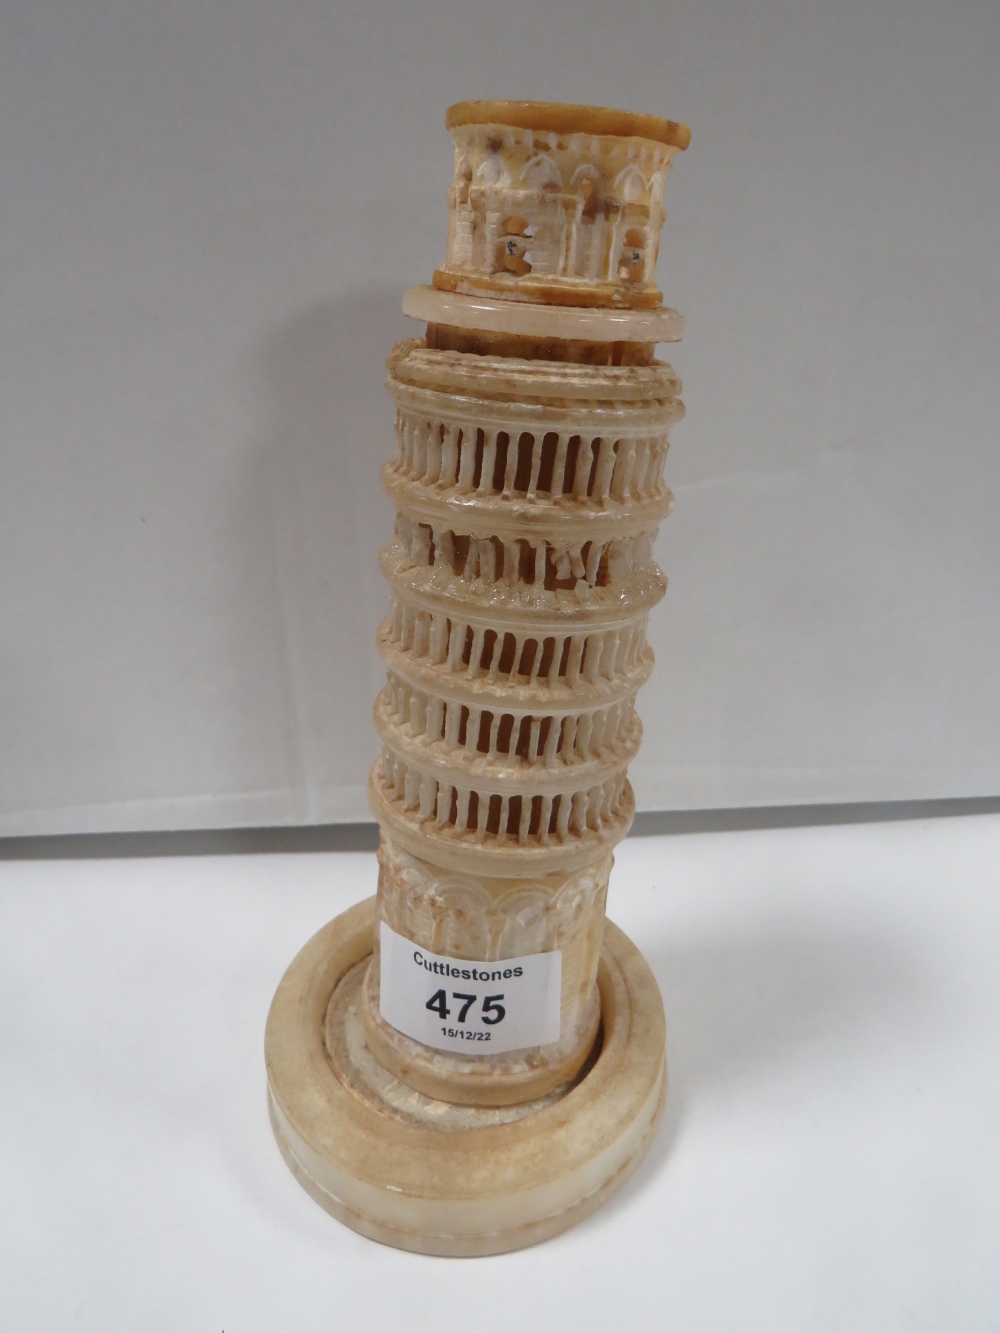 A GRAND TOUR STYLE MODEL OF THE LEANING TOWER OF PISA A/F - Image 2 of 3